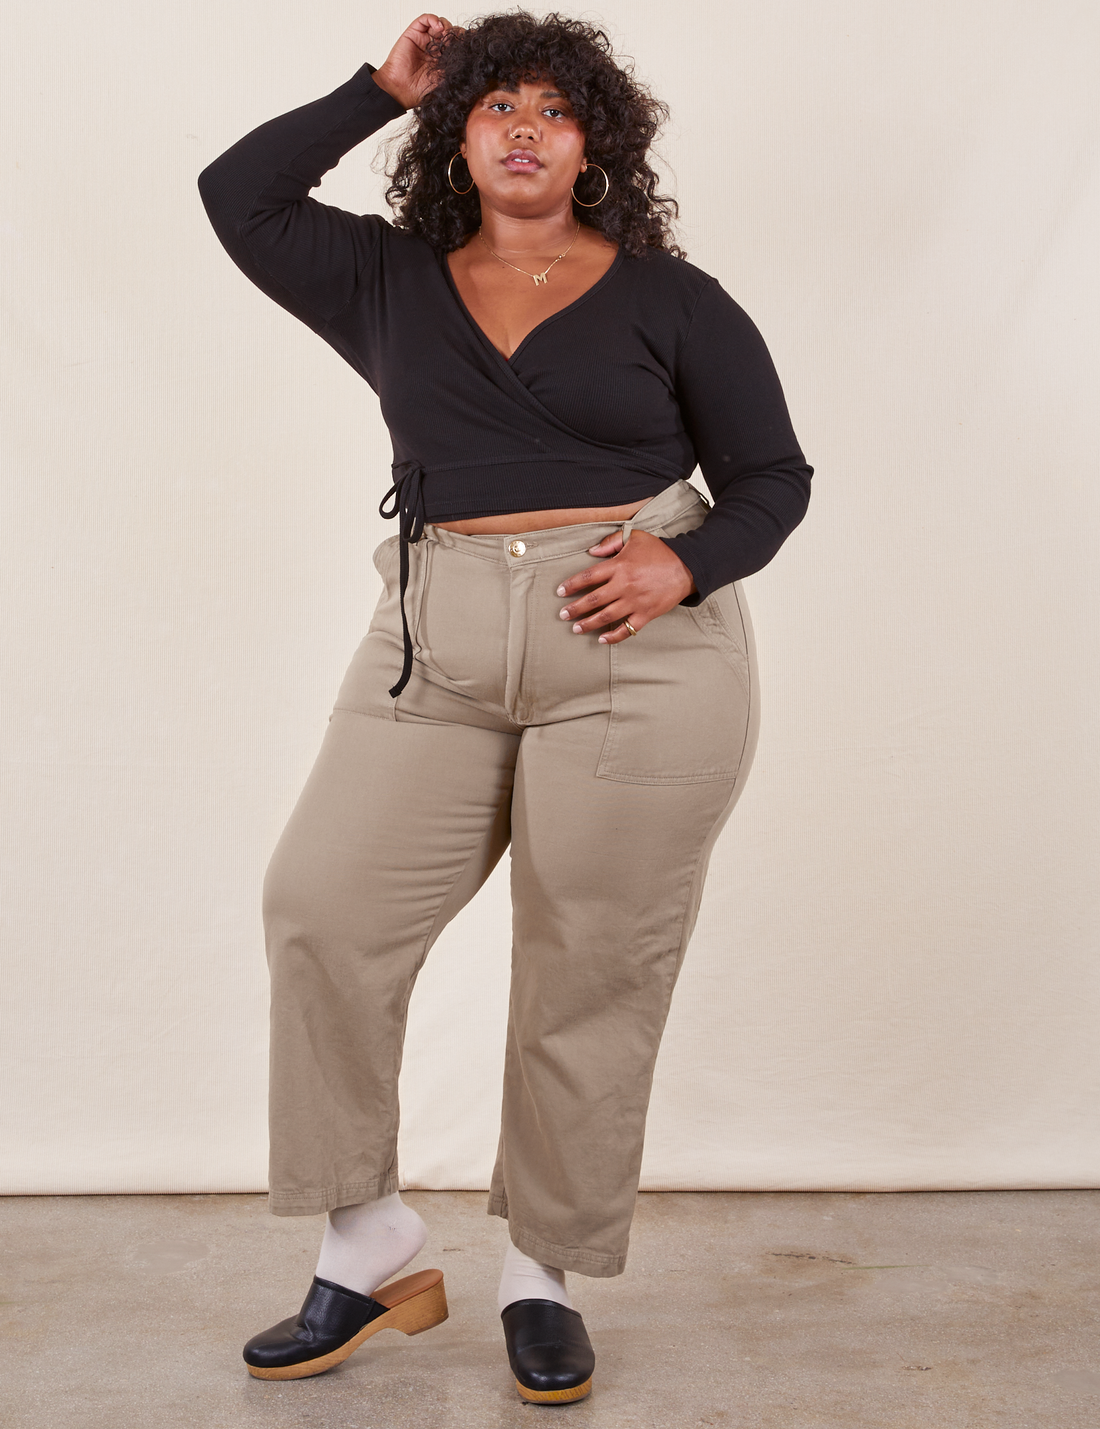 Morgan is 5'5" and wearing Petite 1XL Work Pants in Khaki Grey paired with black Wrap Top